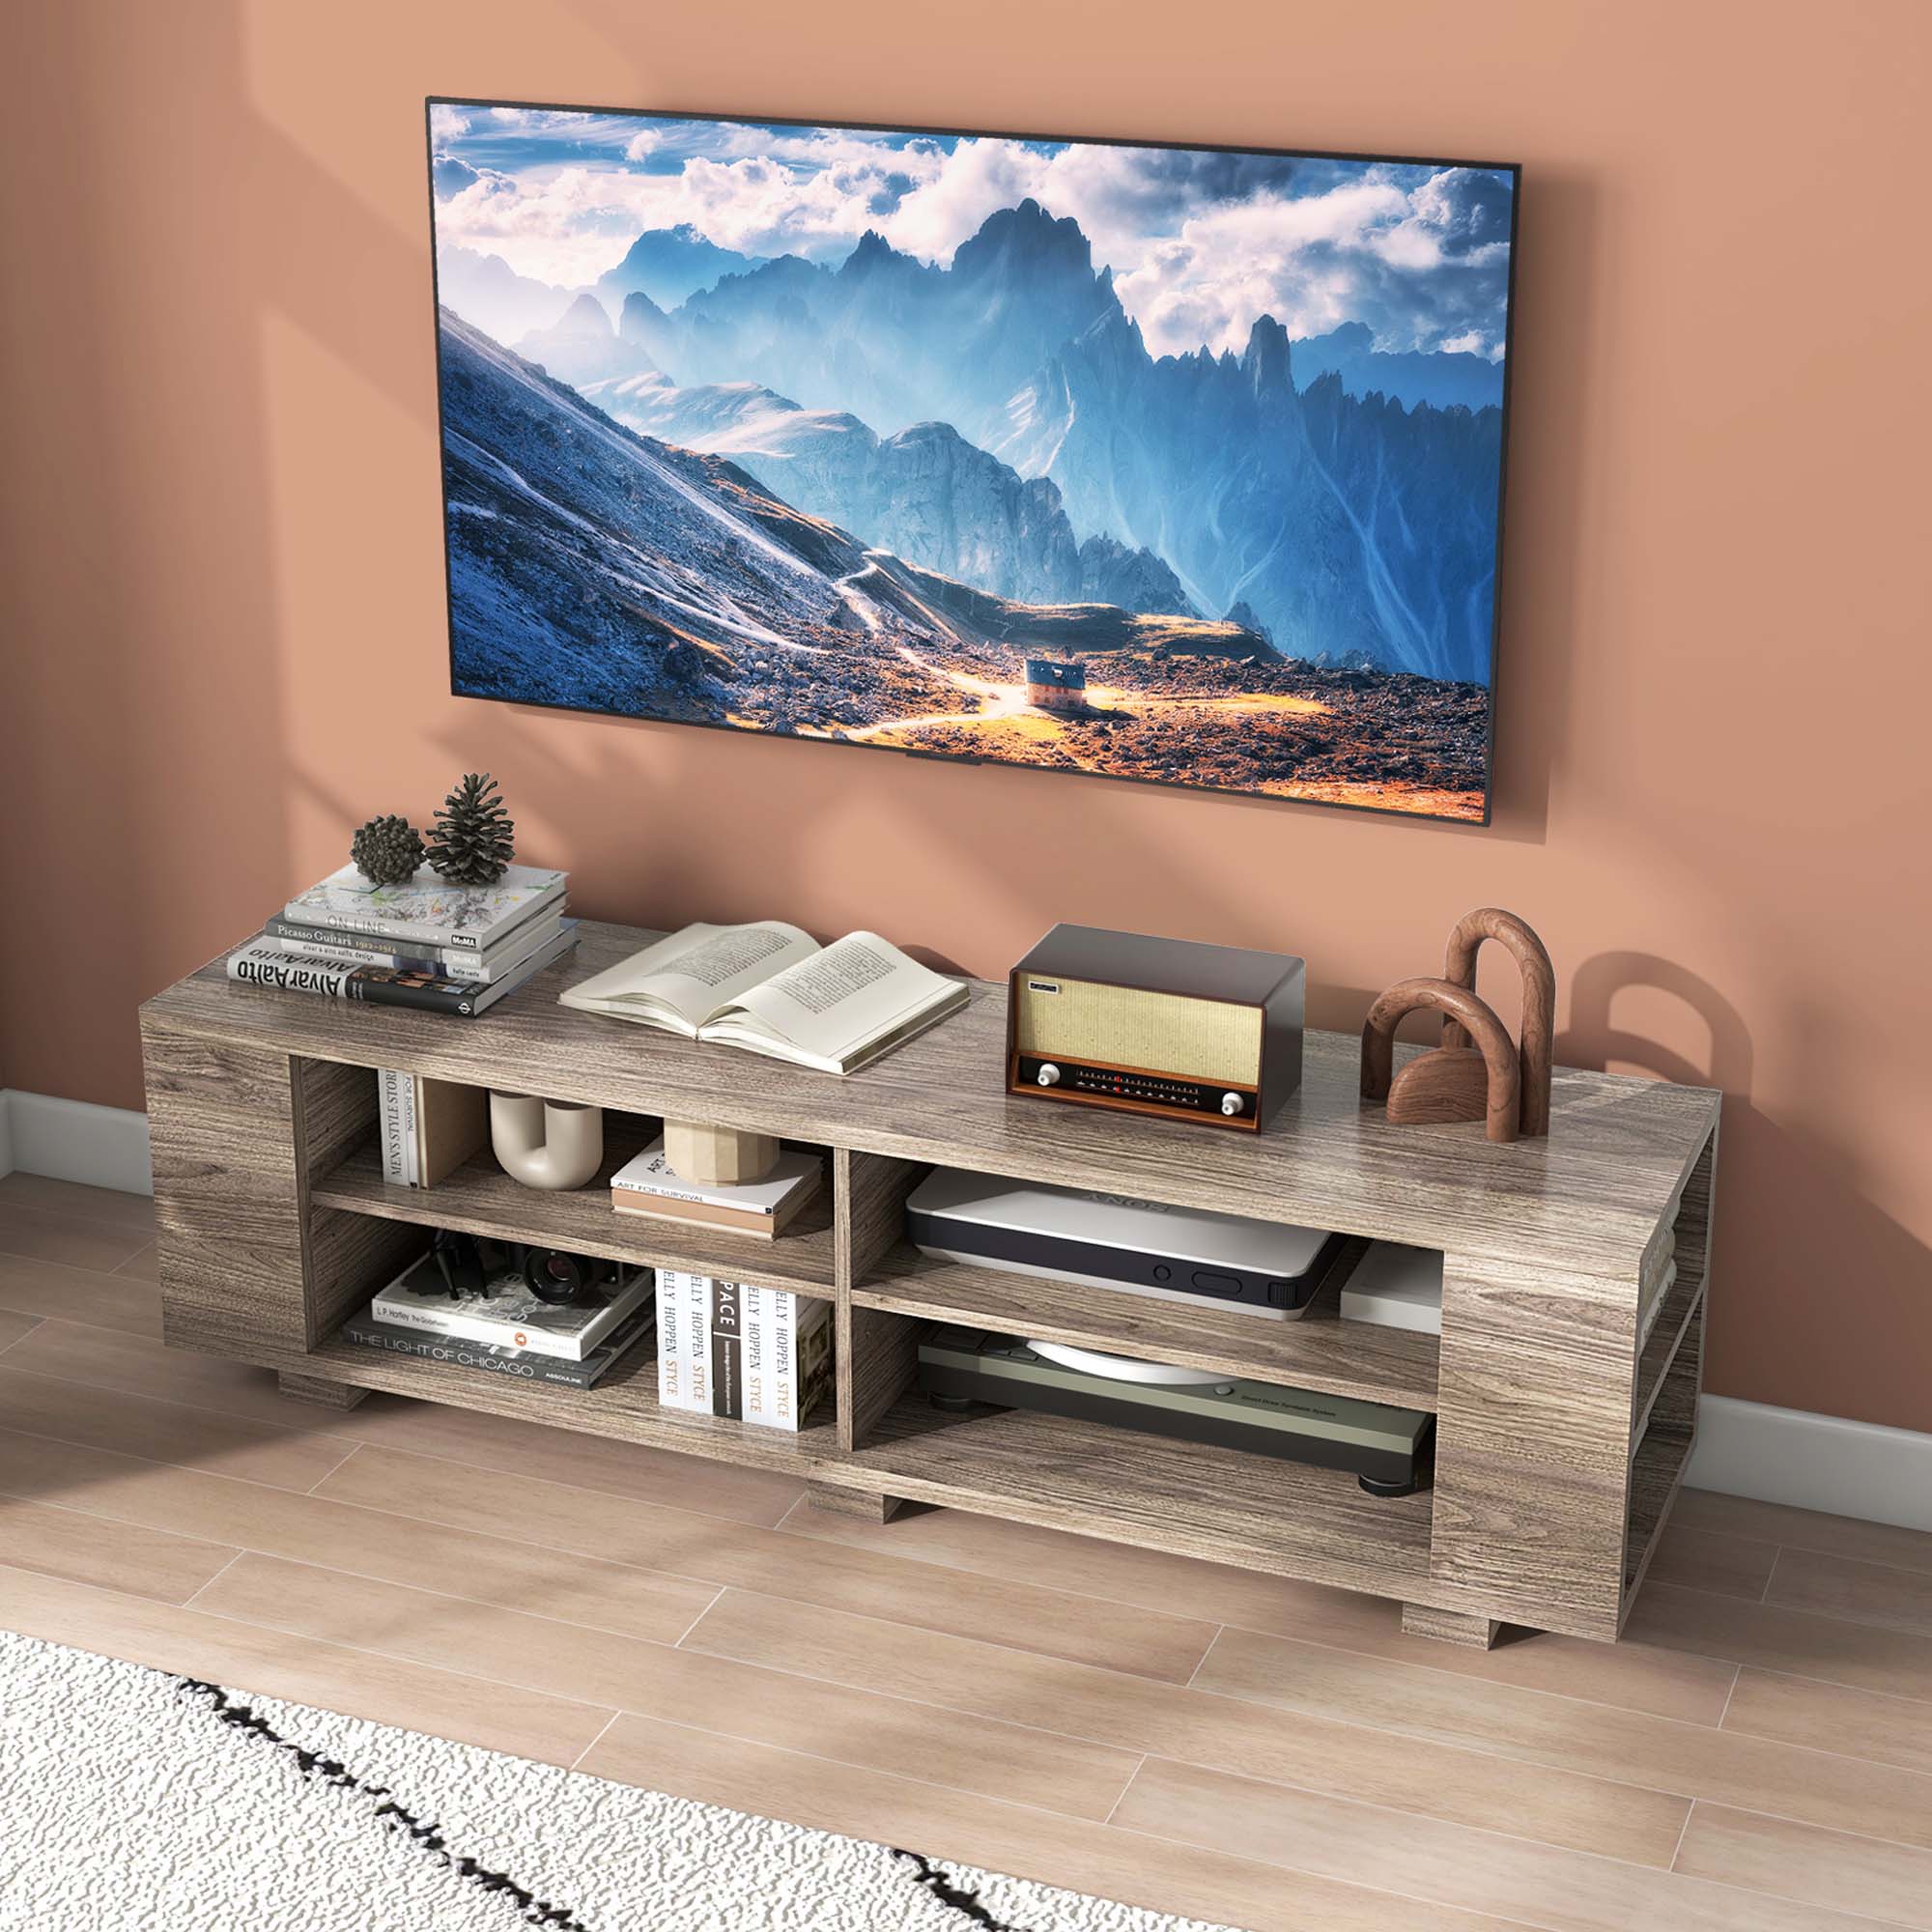 Costway 59" Wood TV Stand Console Storage Entertainment Media Center with Shelf Grey - image 2 of 10